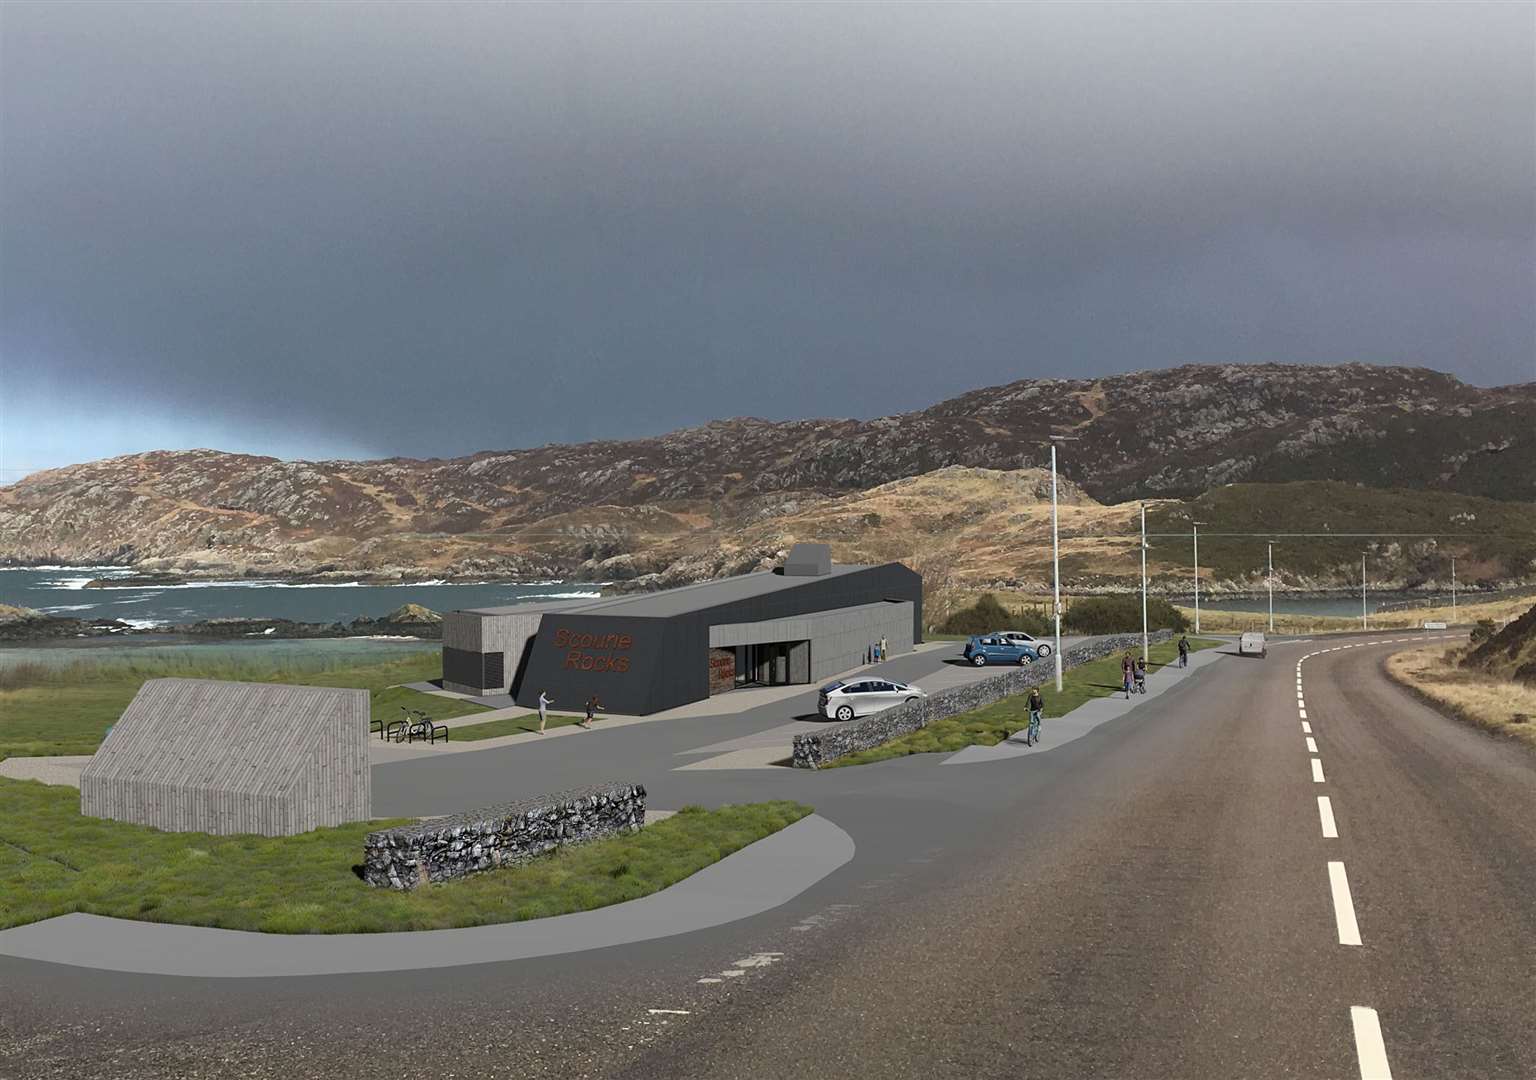 An artist's impression of the Scourie Rocks building.